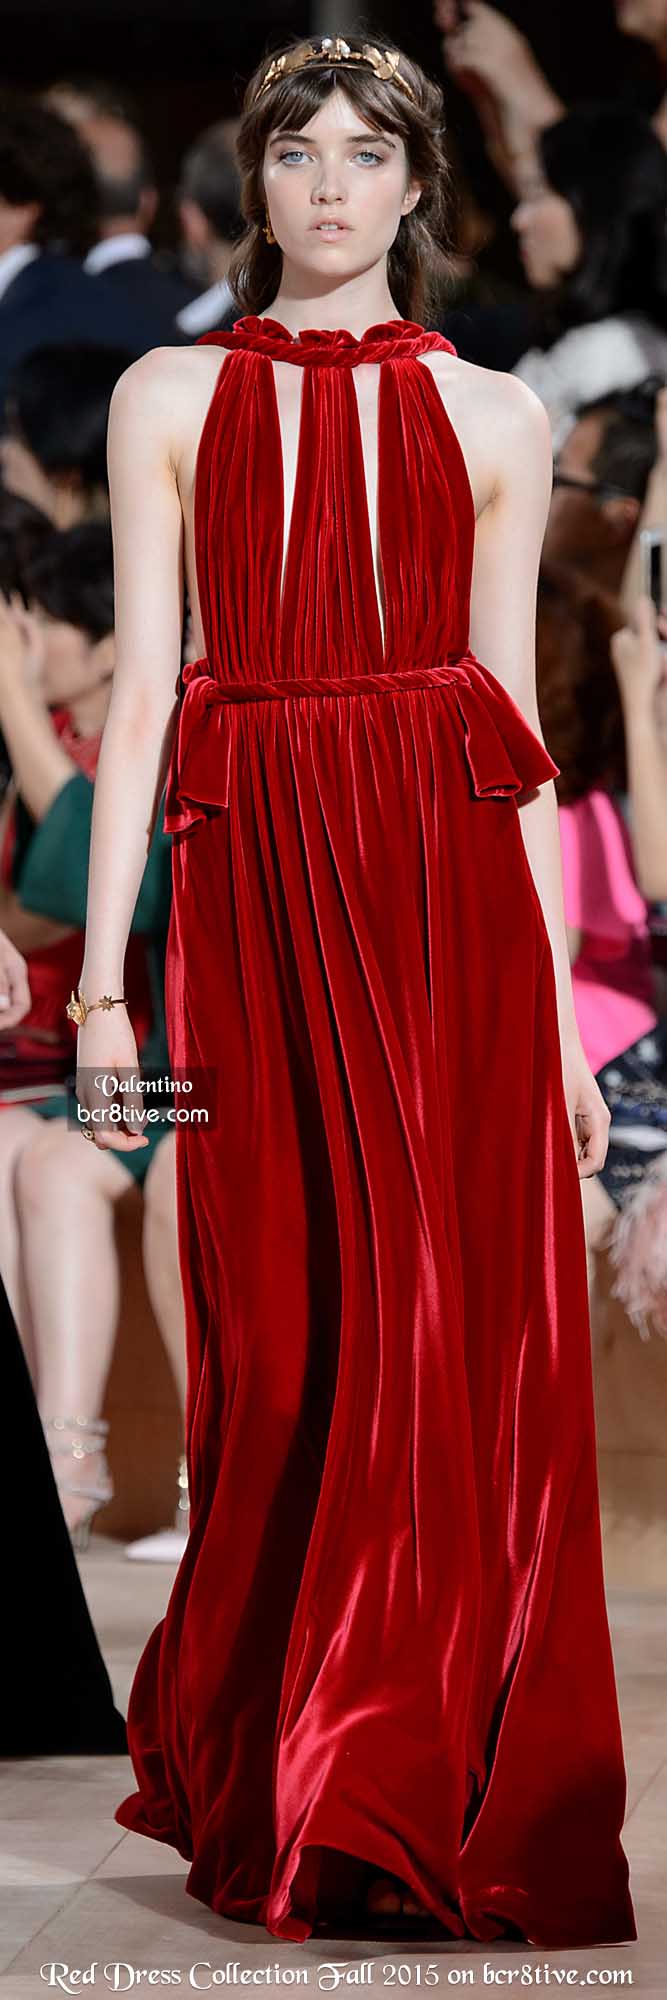 Red Dress Collection Fall 2015 – Page 2 – Be Creative